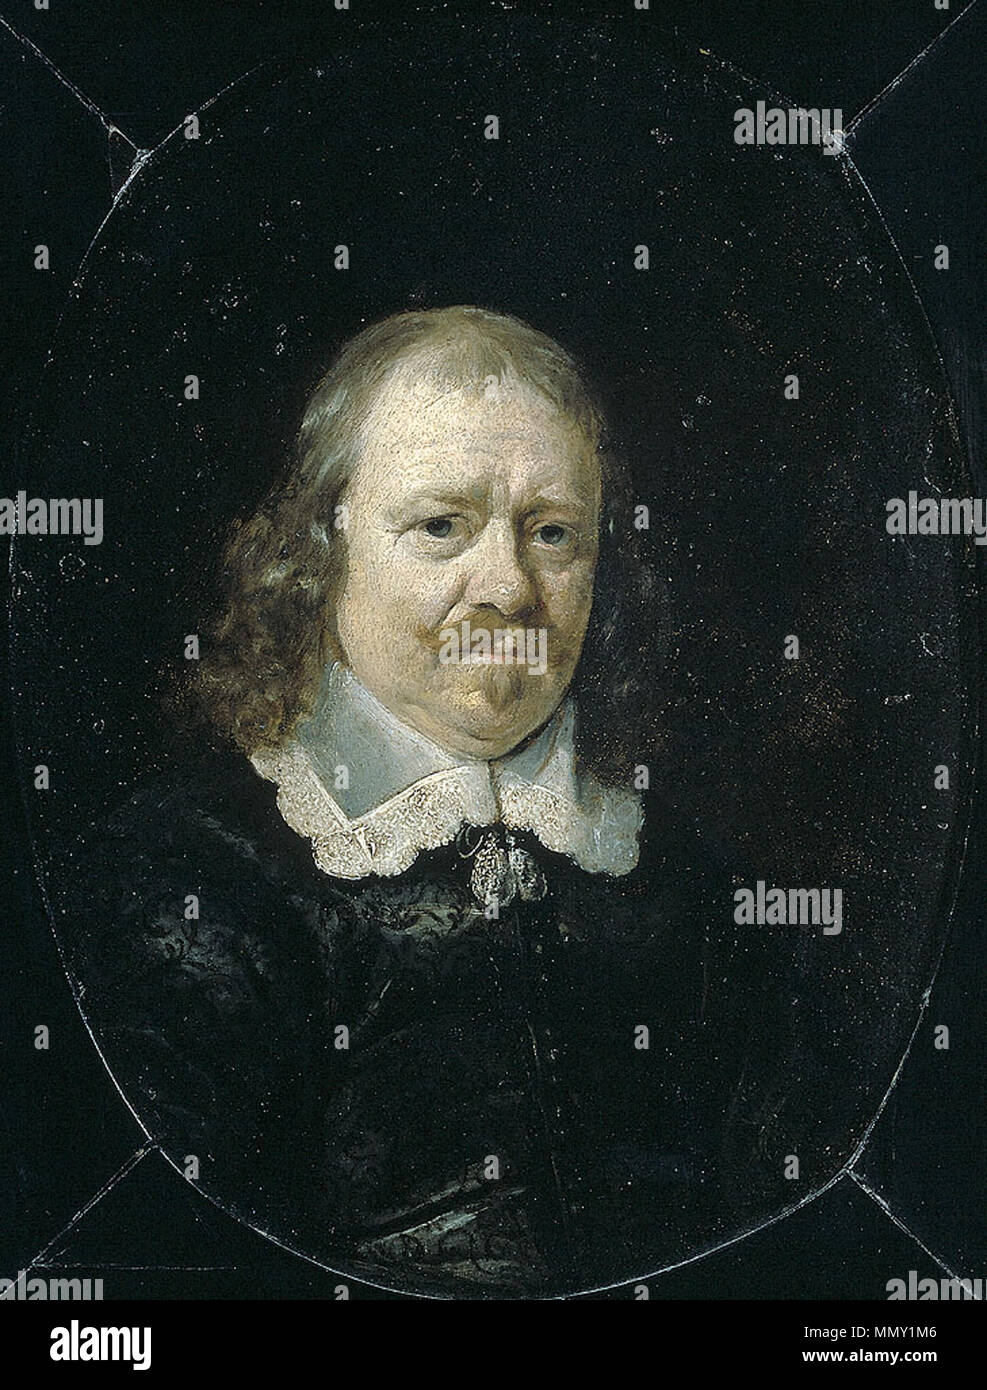 Godard van Reede (1588-1648), lord of Nederhorst. Delegate of the province of Utrecht at the peace conference at Münster (1646-48).. between 1646 and 1648. Gerard ter Borch d. J. 014 Stock Photo